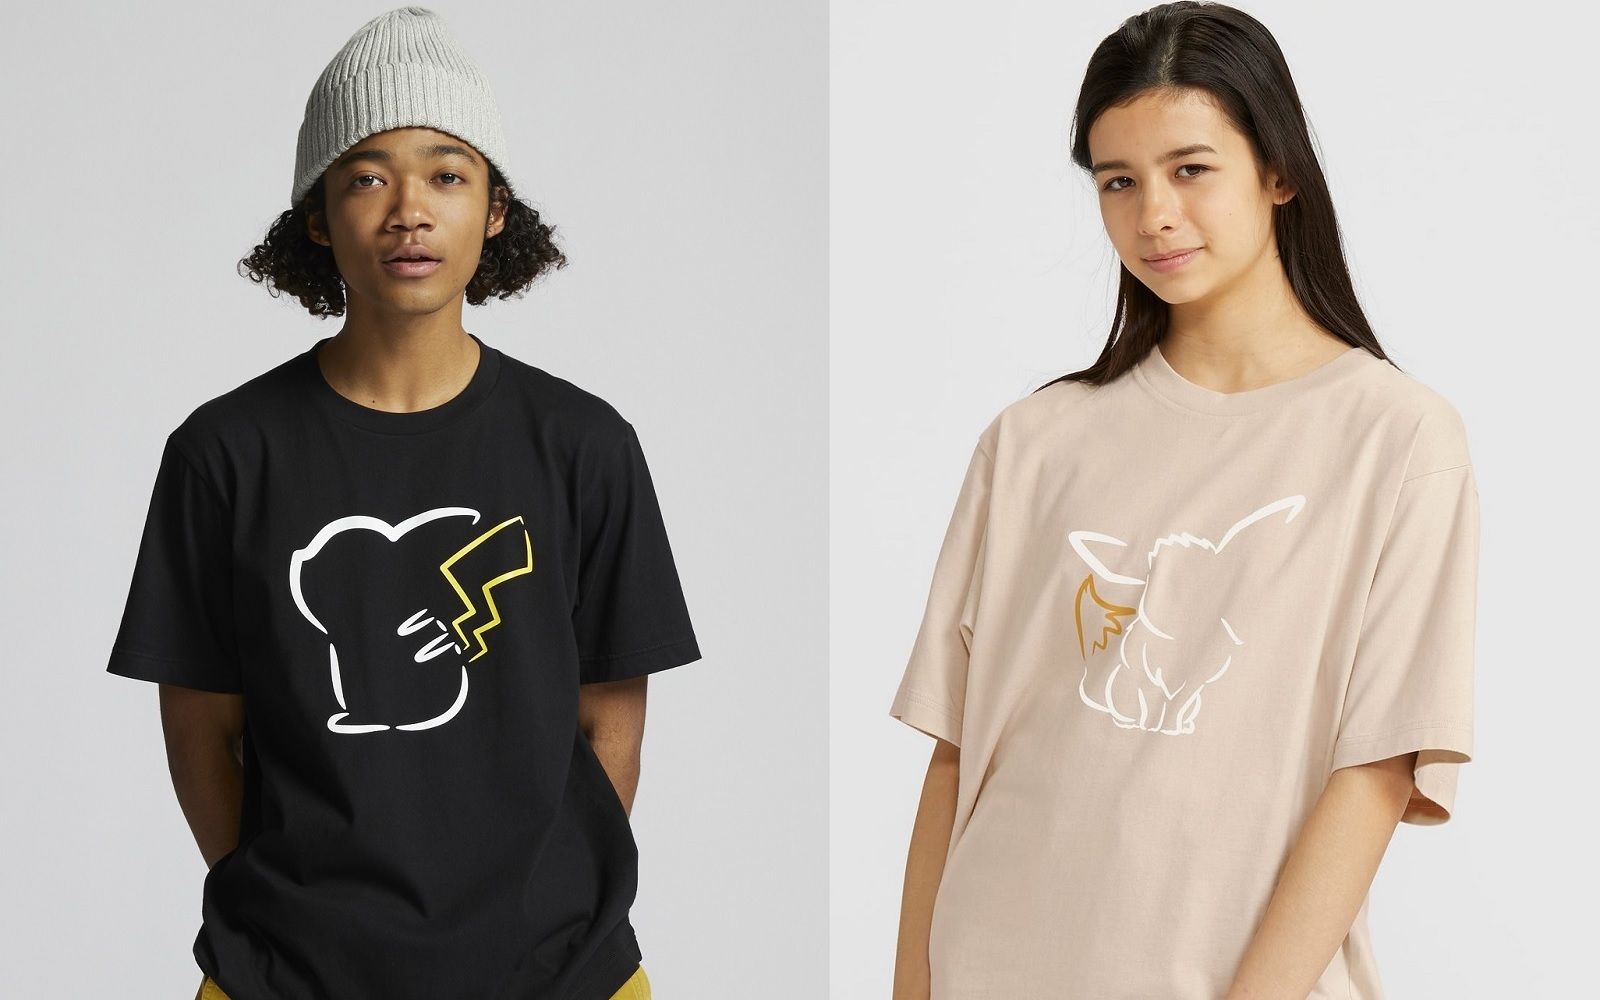 UNIQLO UT introduces a series of tshirts dedicated to the Pokémon